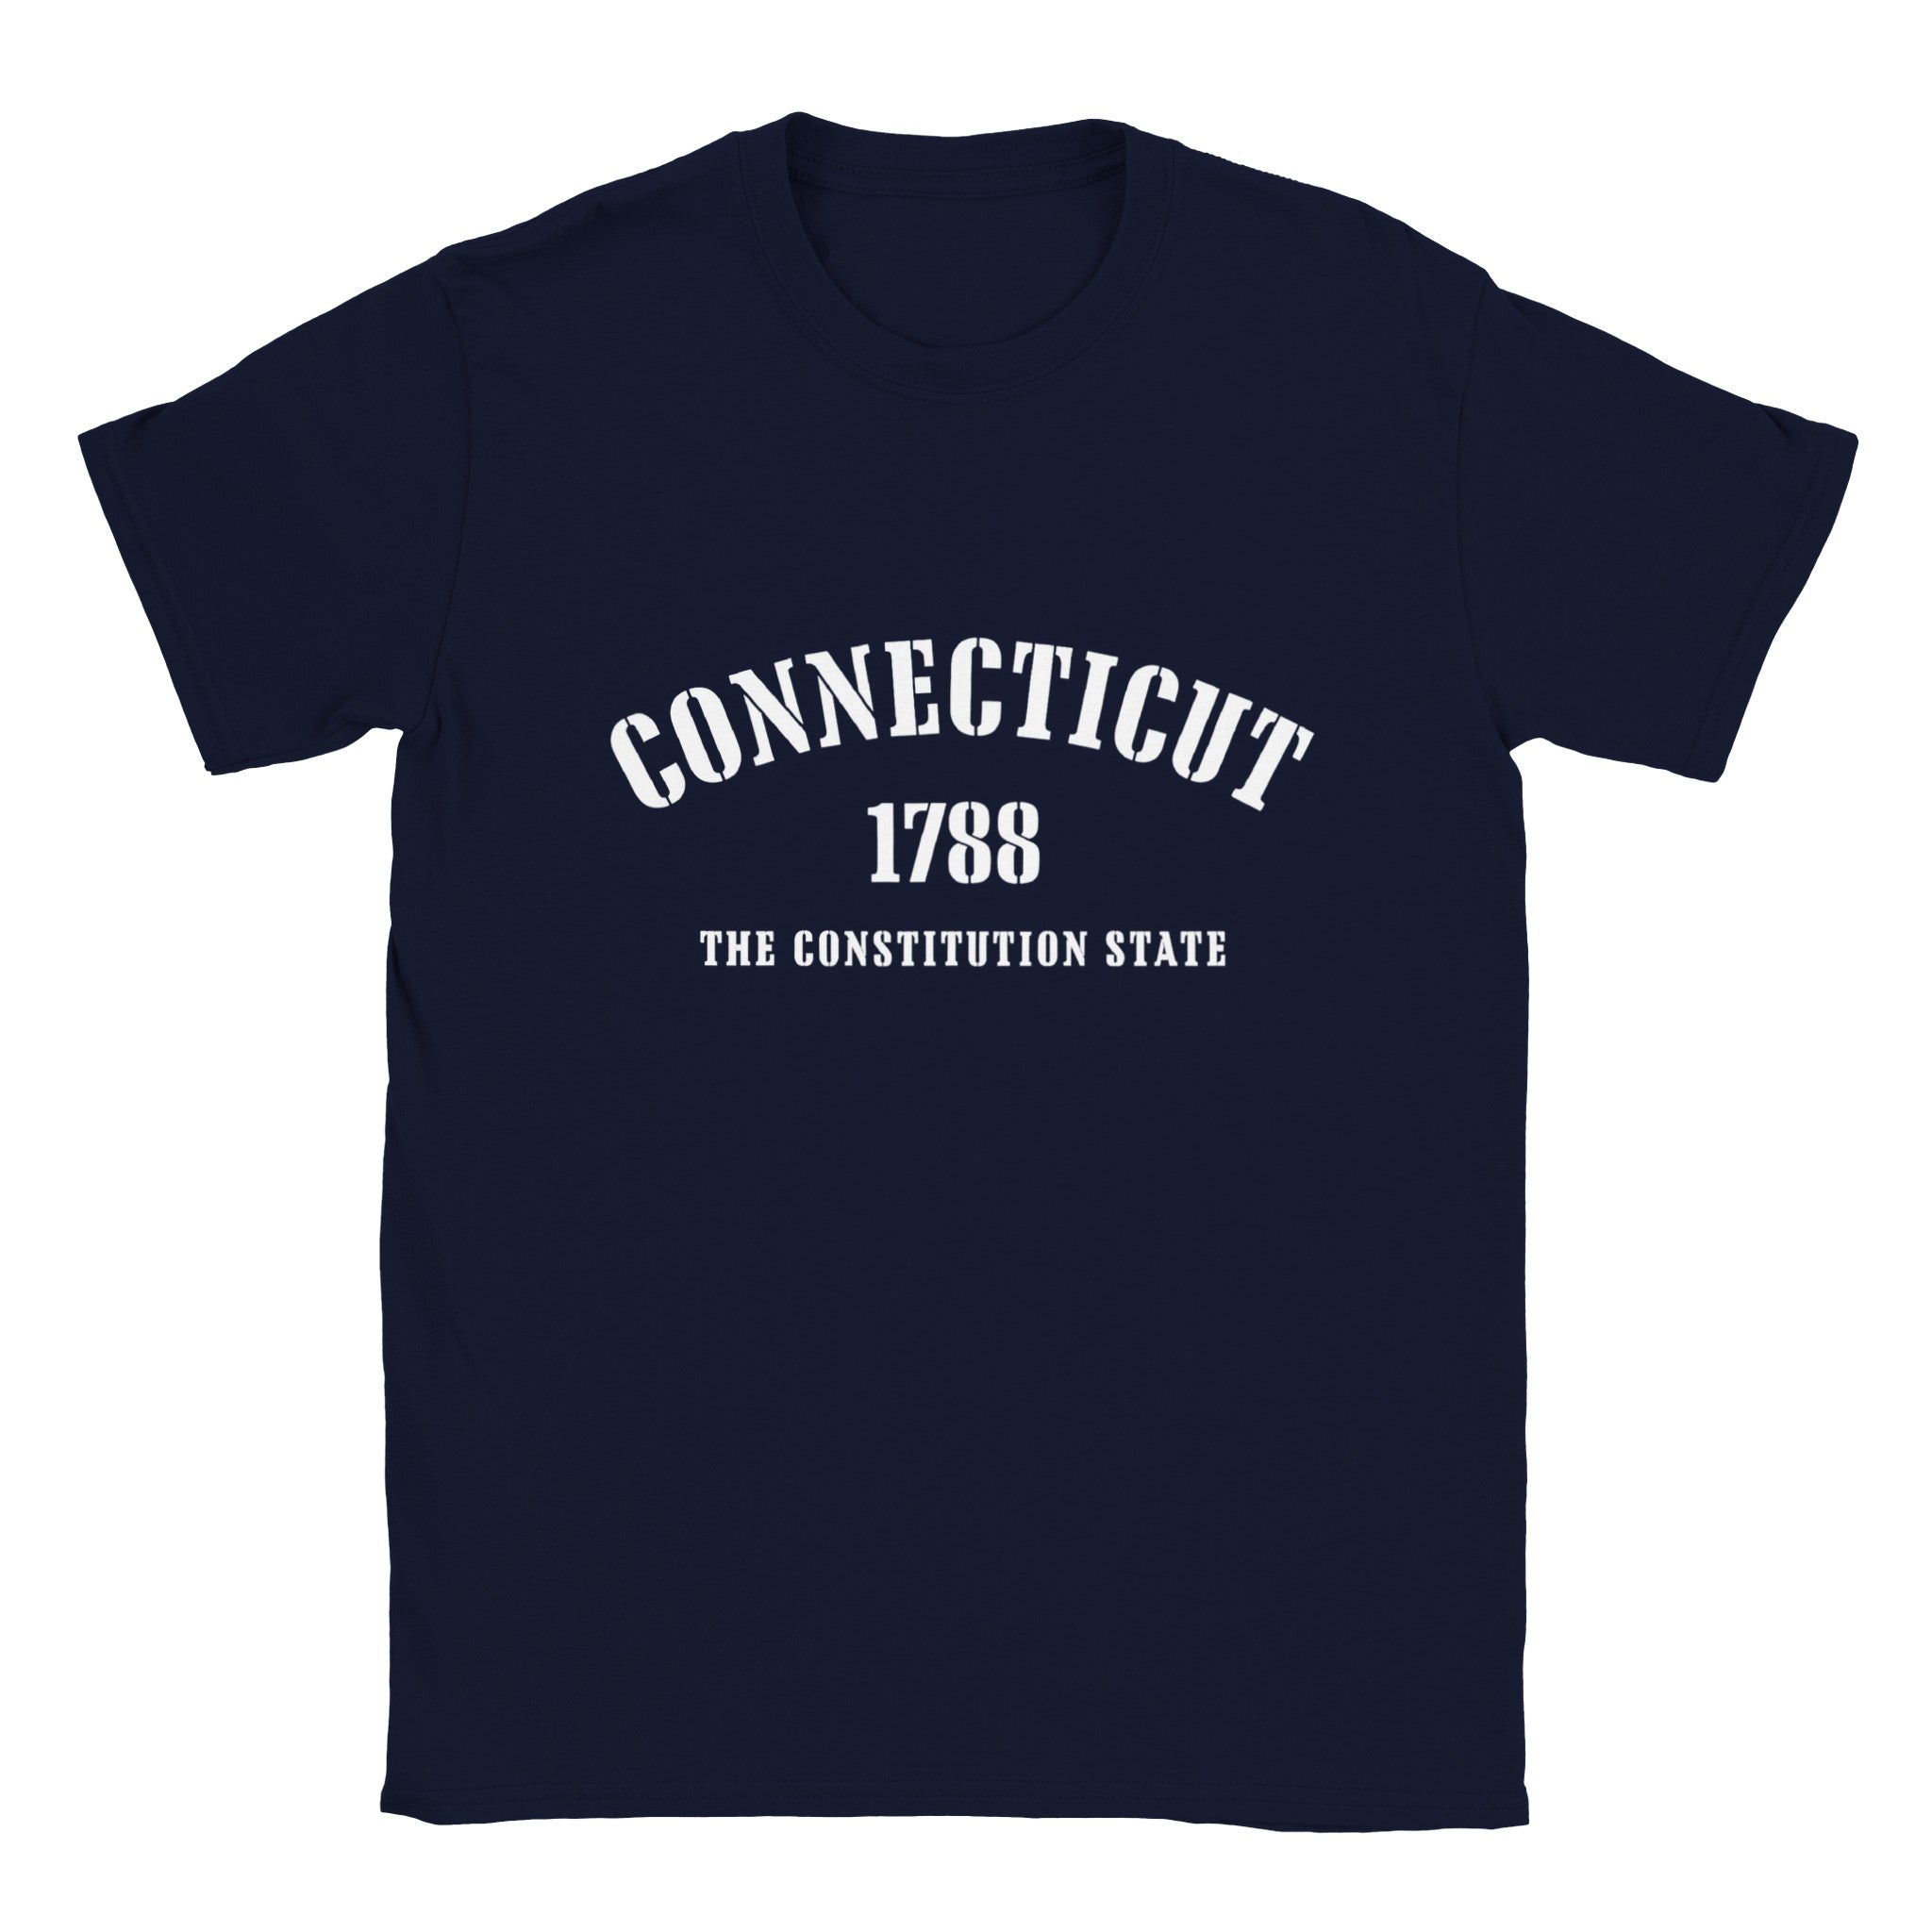 Connecticut- Classic Unisex Crewneck States T-shirt - Creations by Chris and Carlos